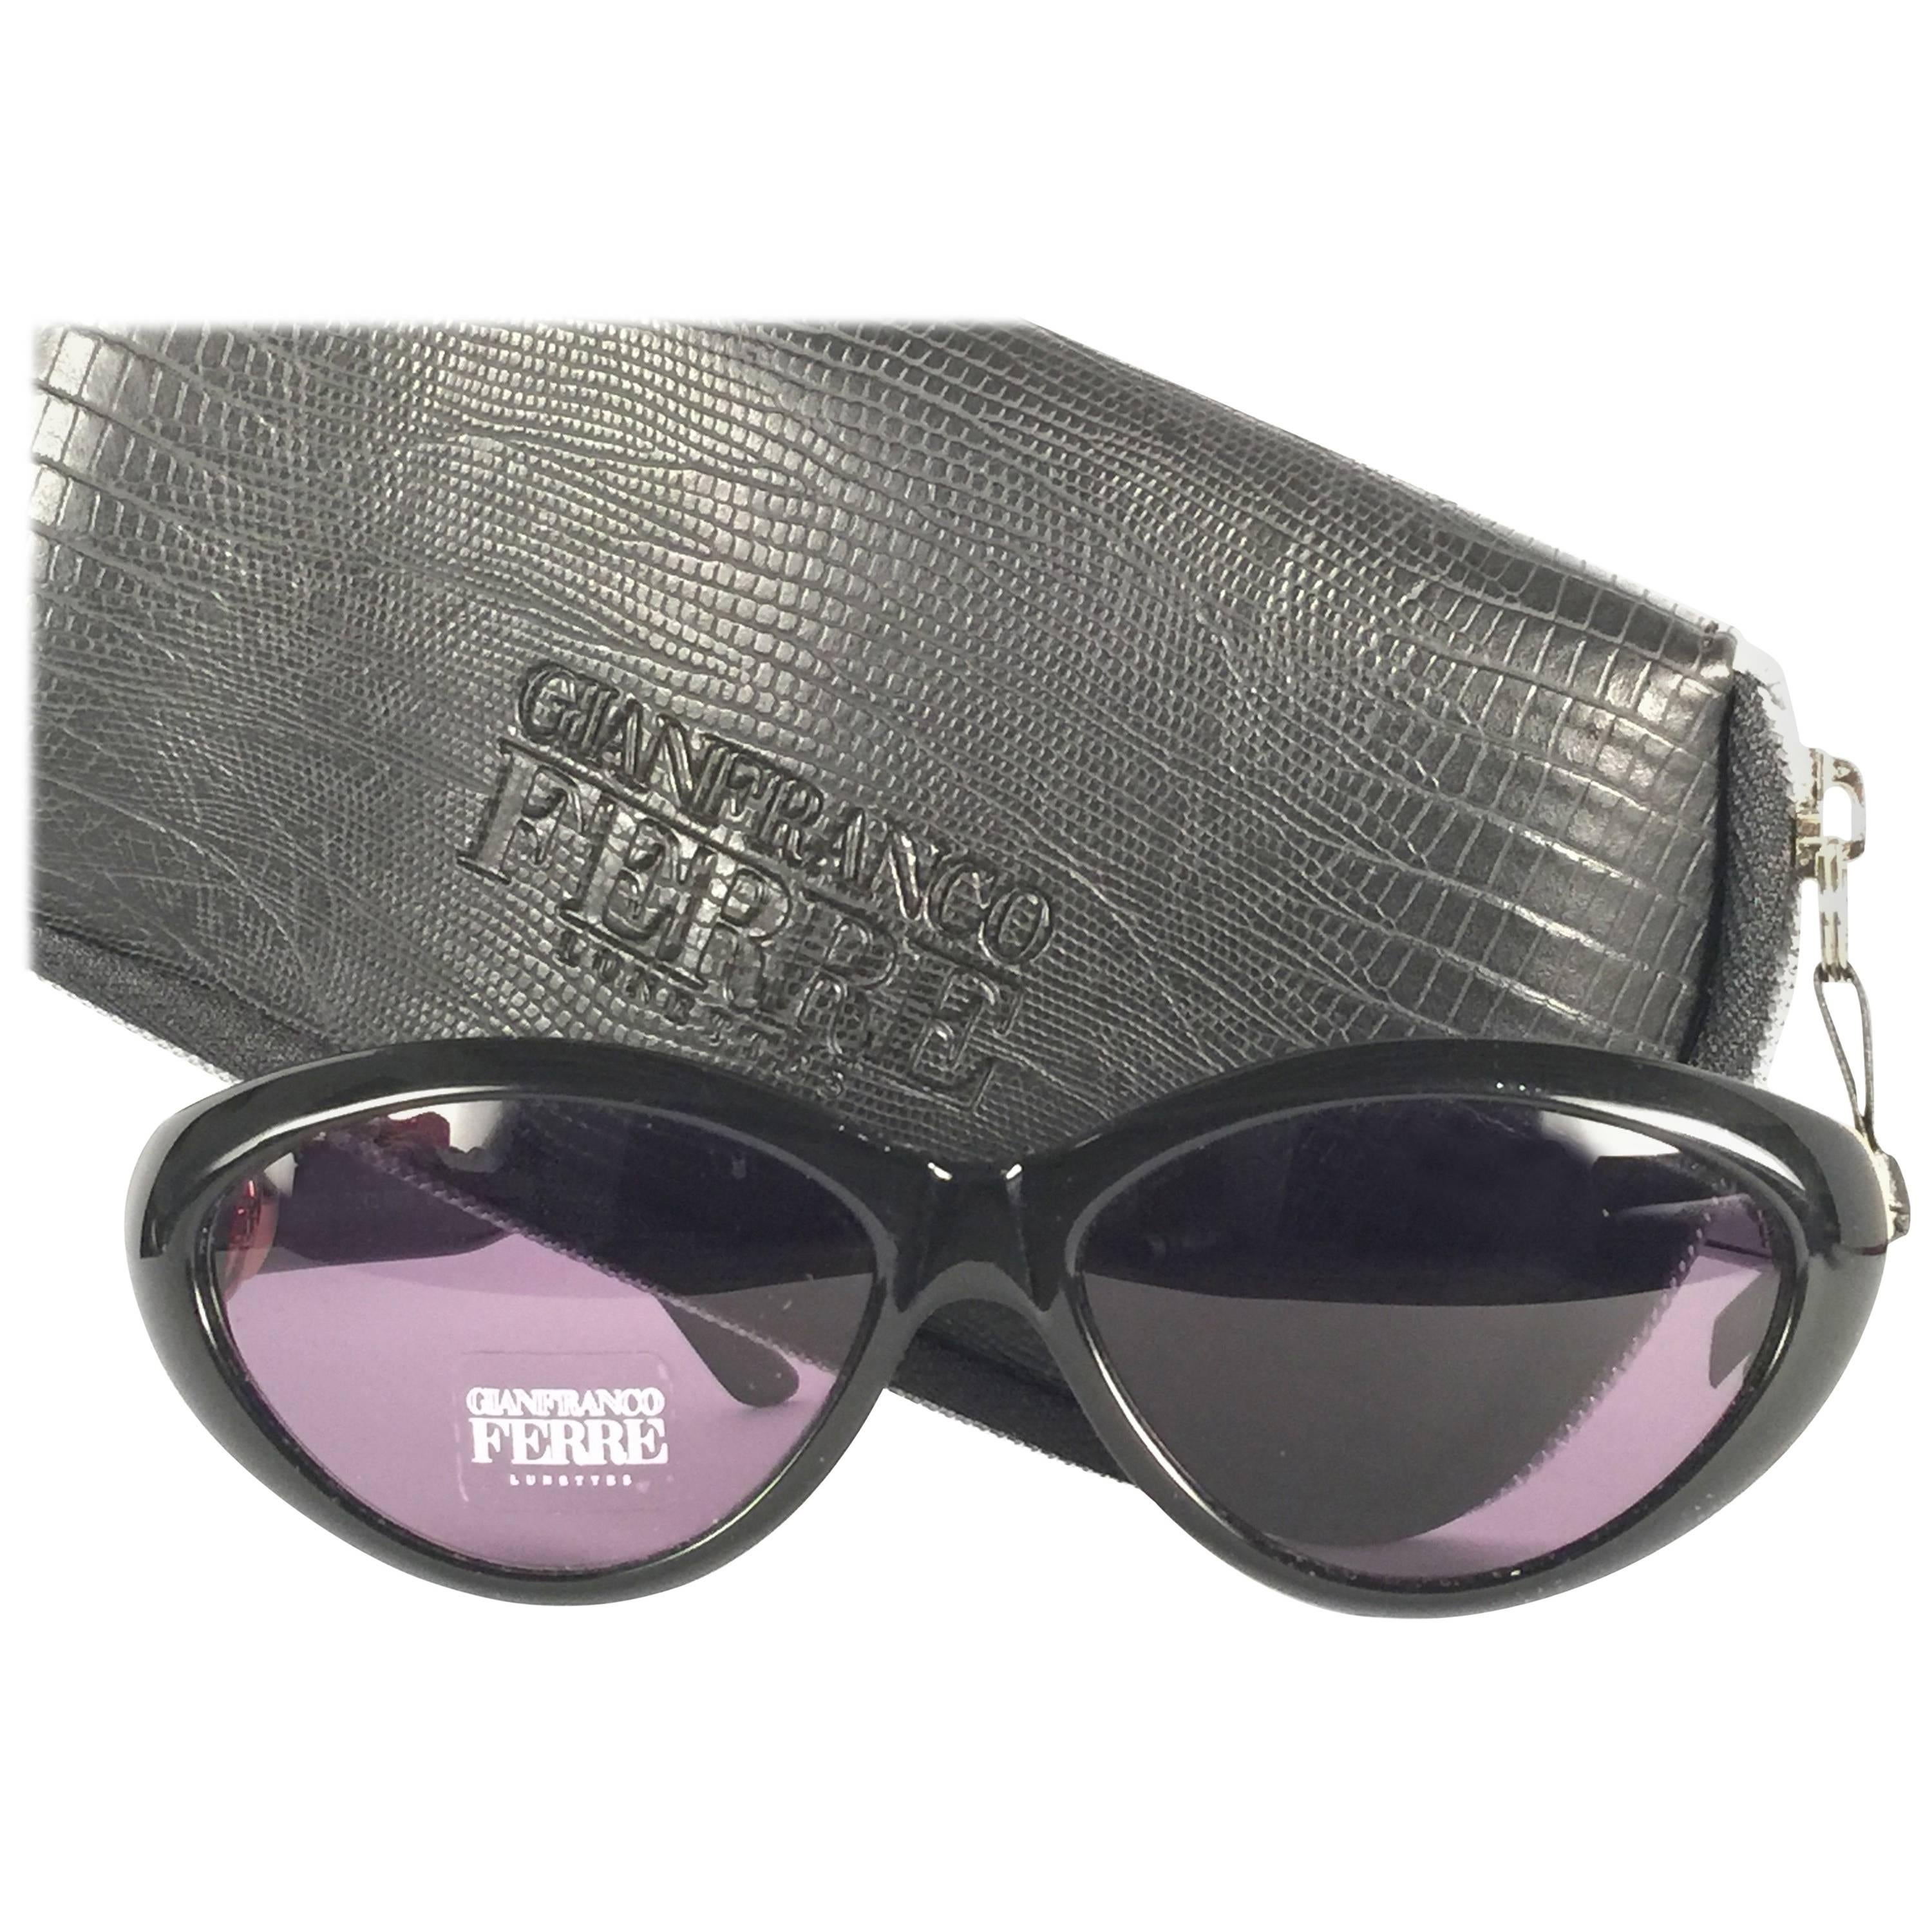 New Vintage Gianfranco Ferré Black & Rhinestones 1990's Made in Italy Sunglasses For Sale